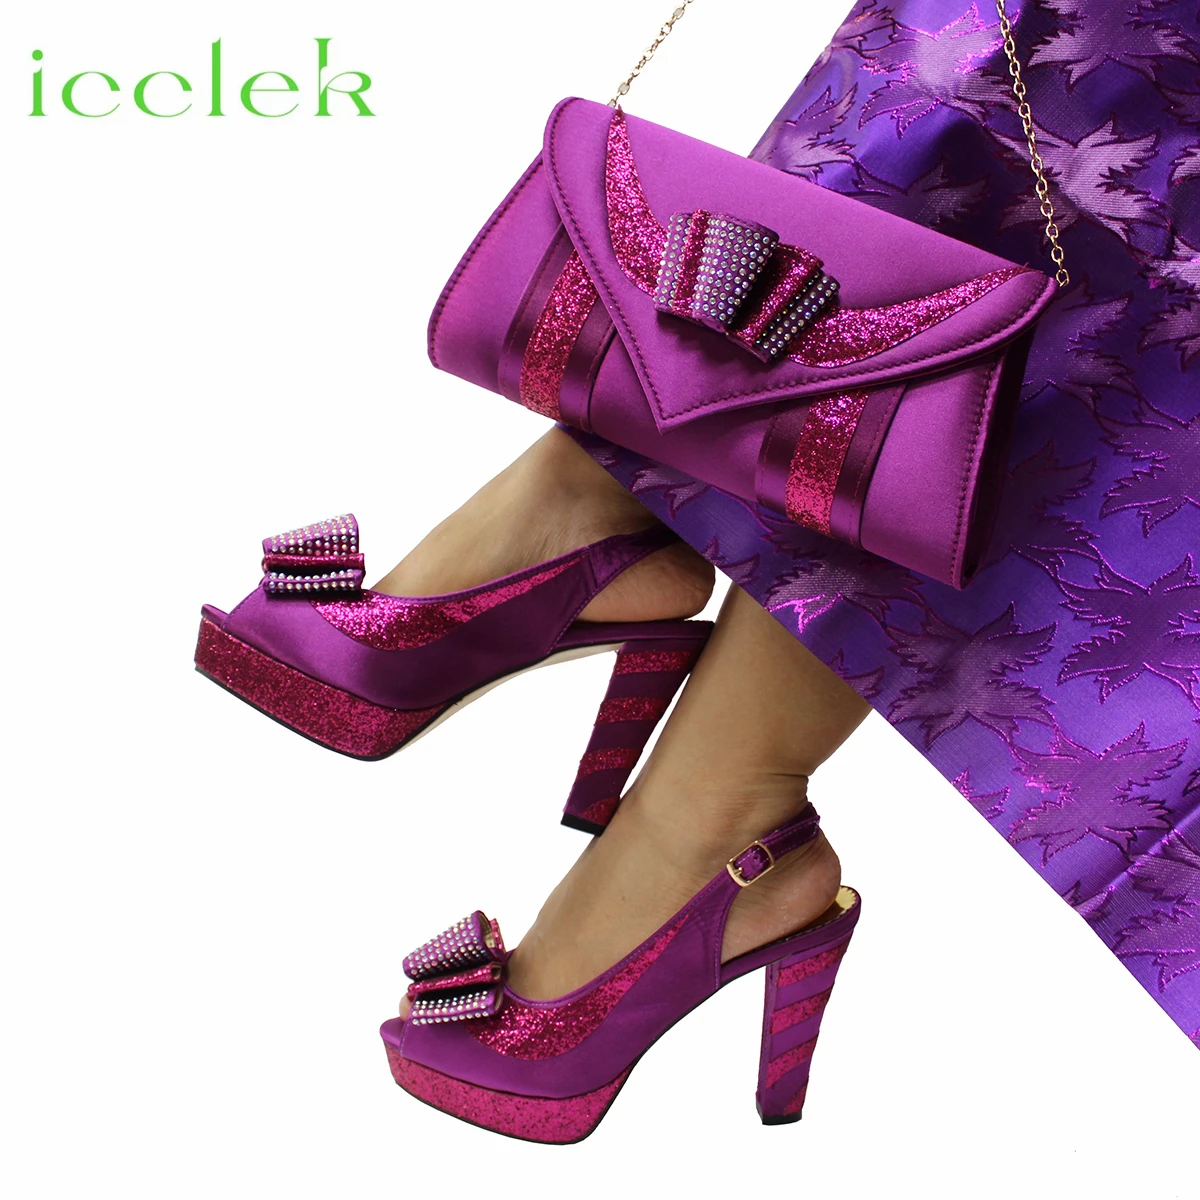 

Magenta Latest Elegant Style Peep Toe Decorated With Butterfly Design Banquet Women's Shoes And Bag Set for Wedding Party